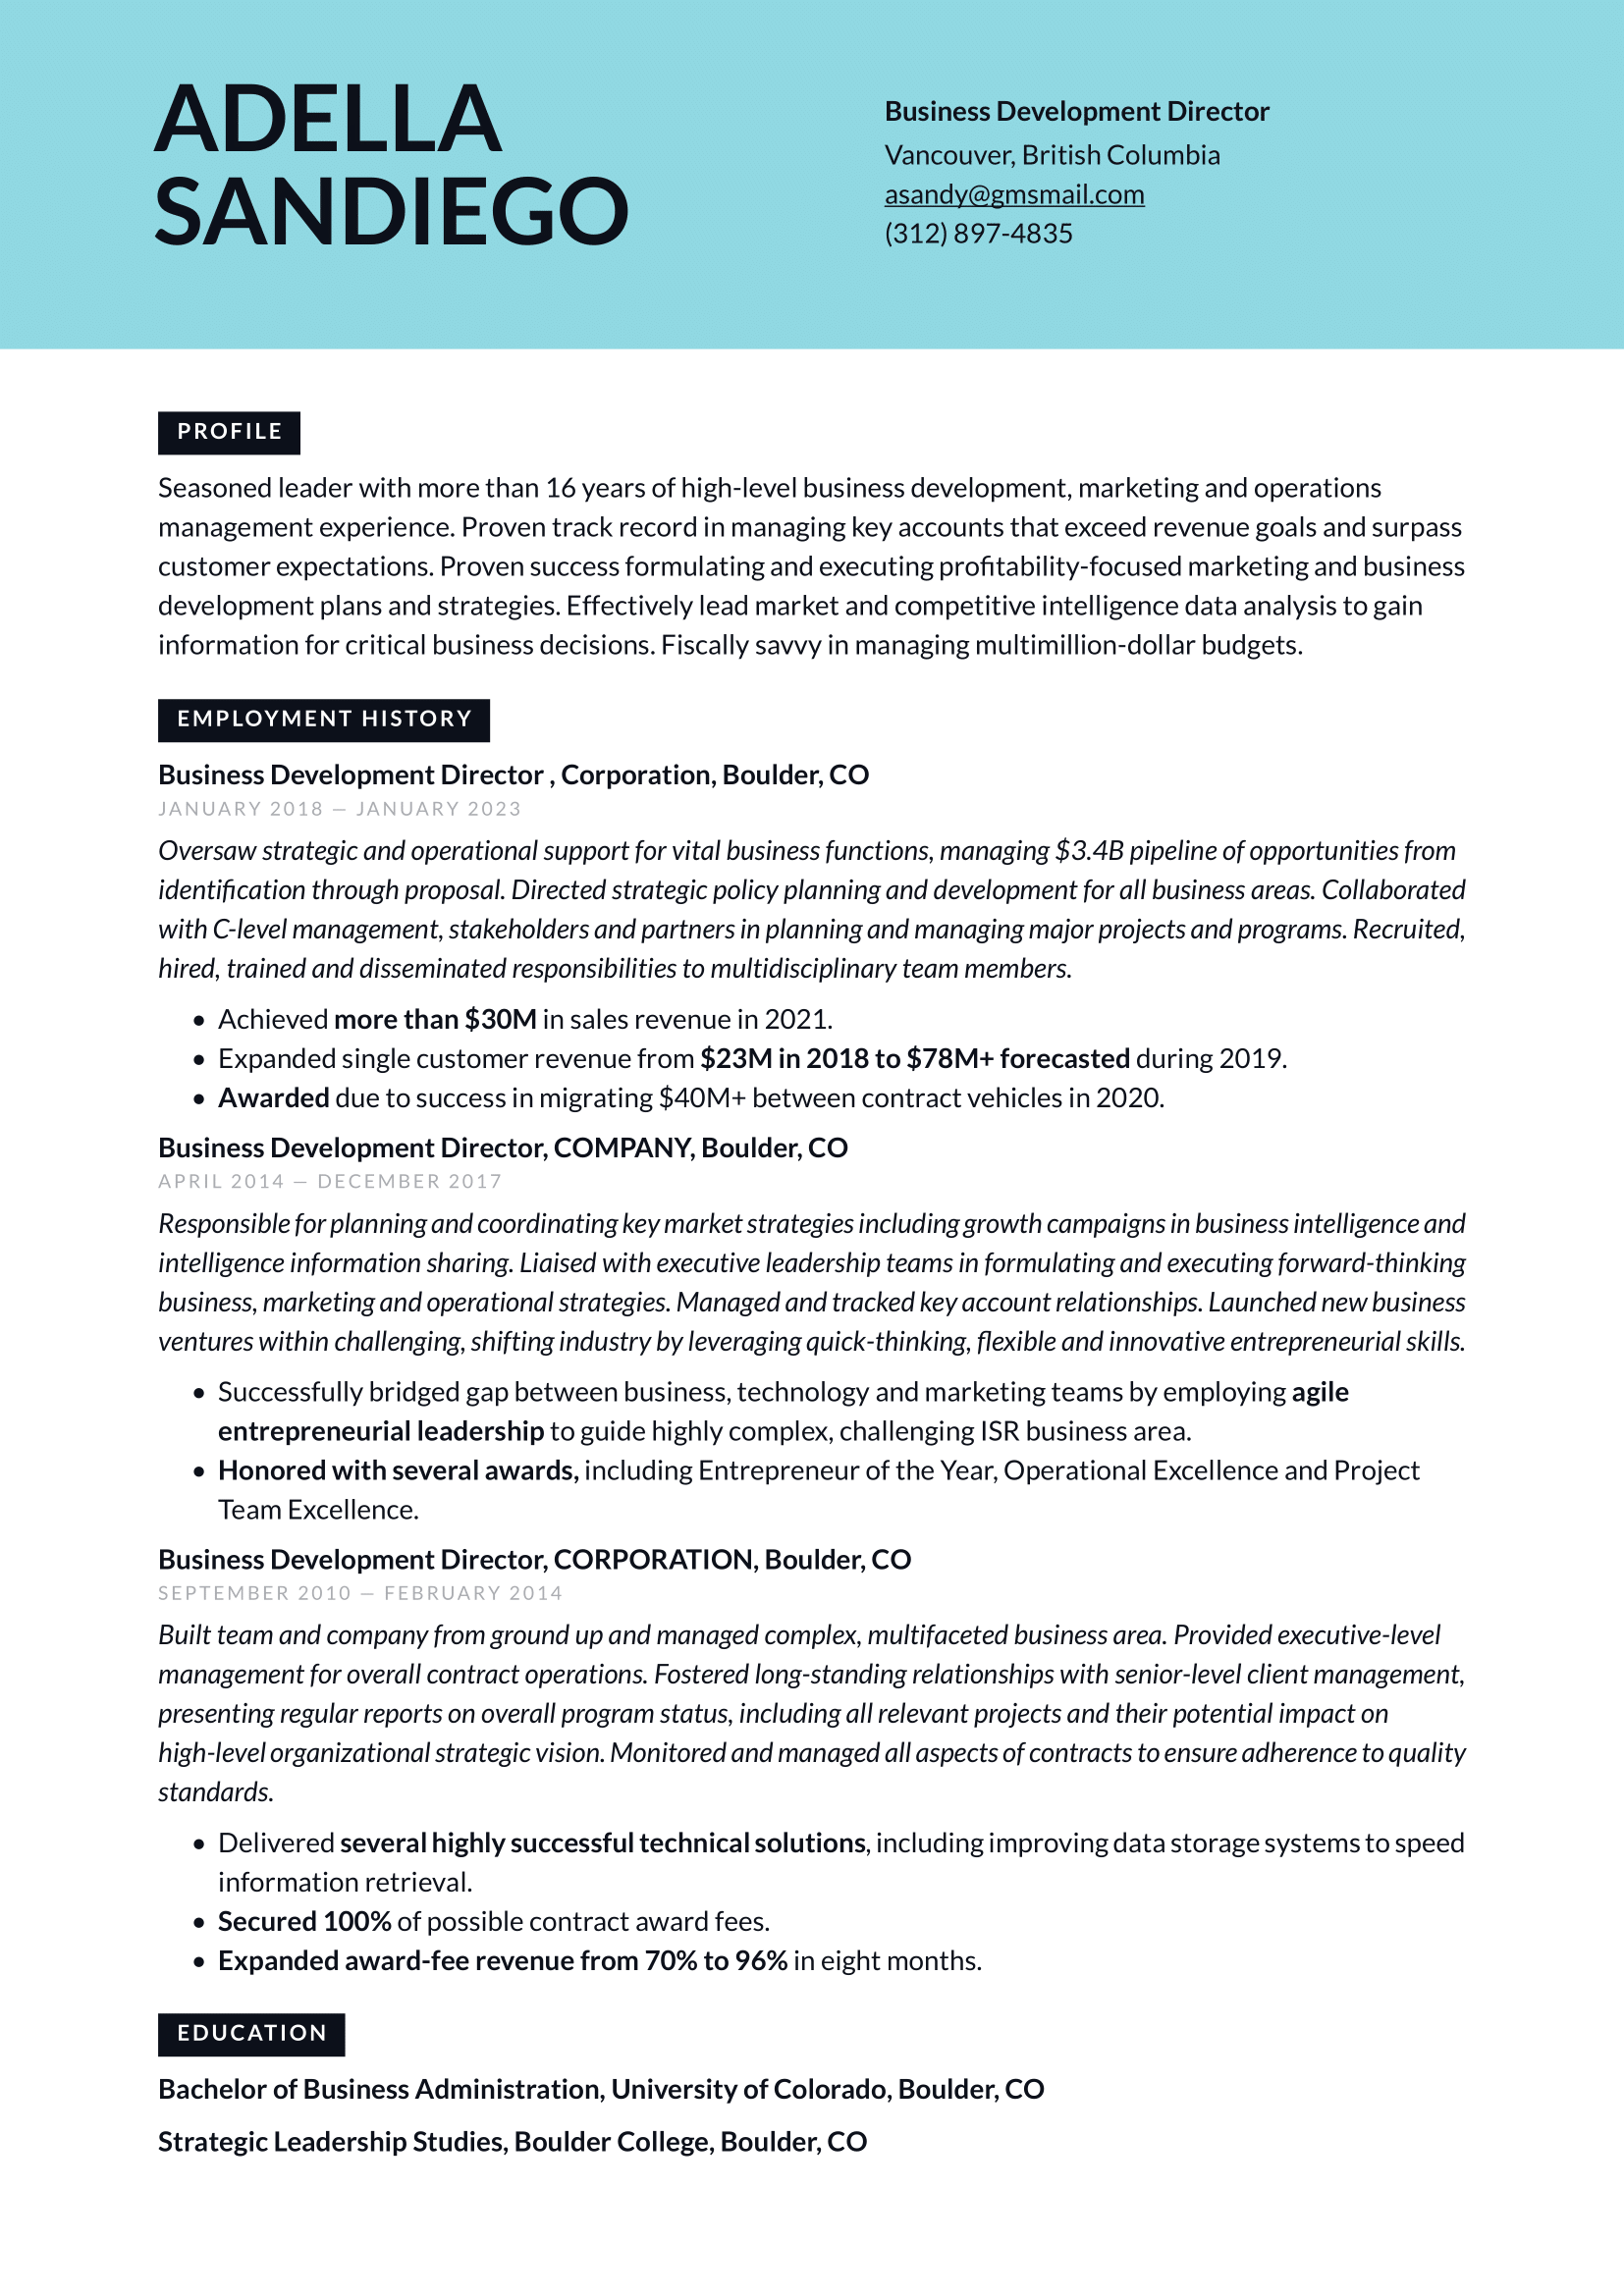 Business_Development_Director-Resume-Example.png